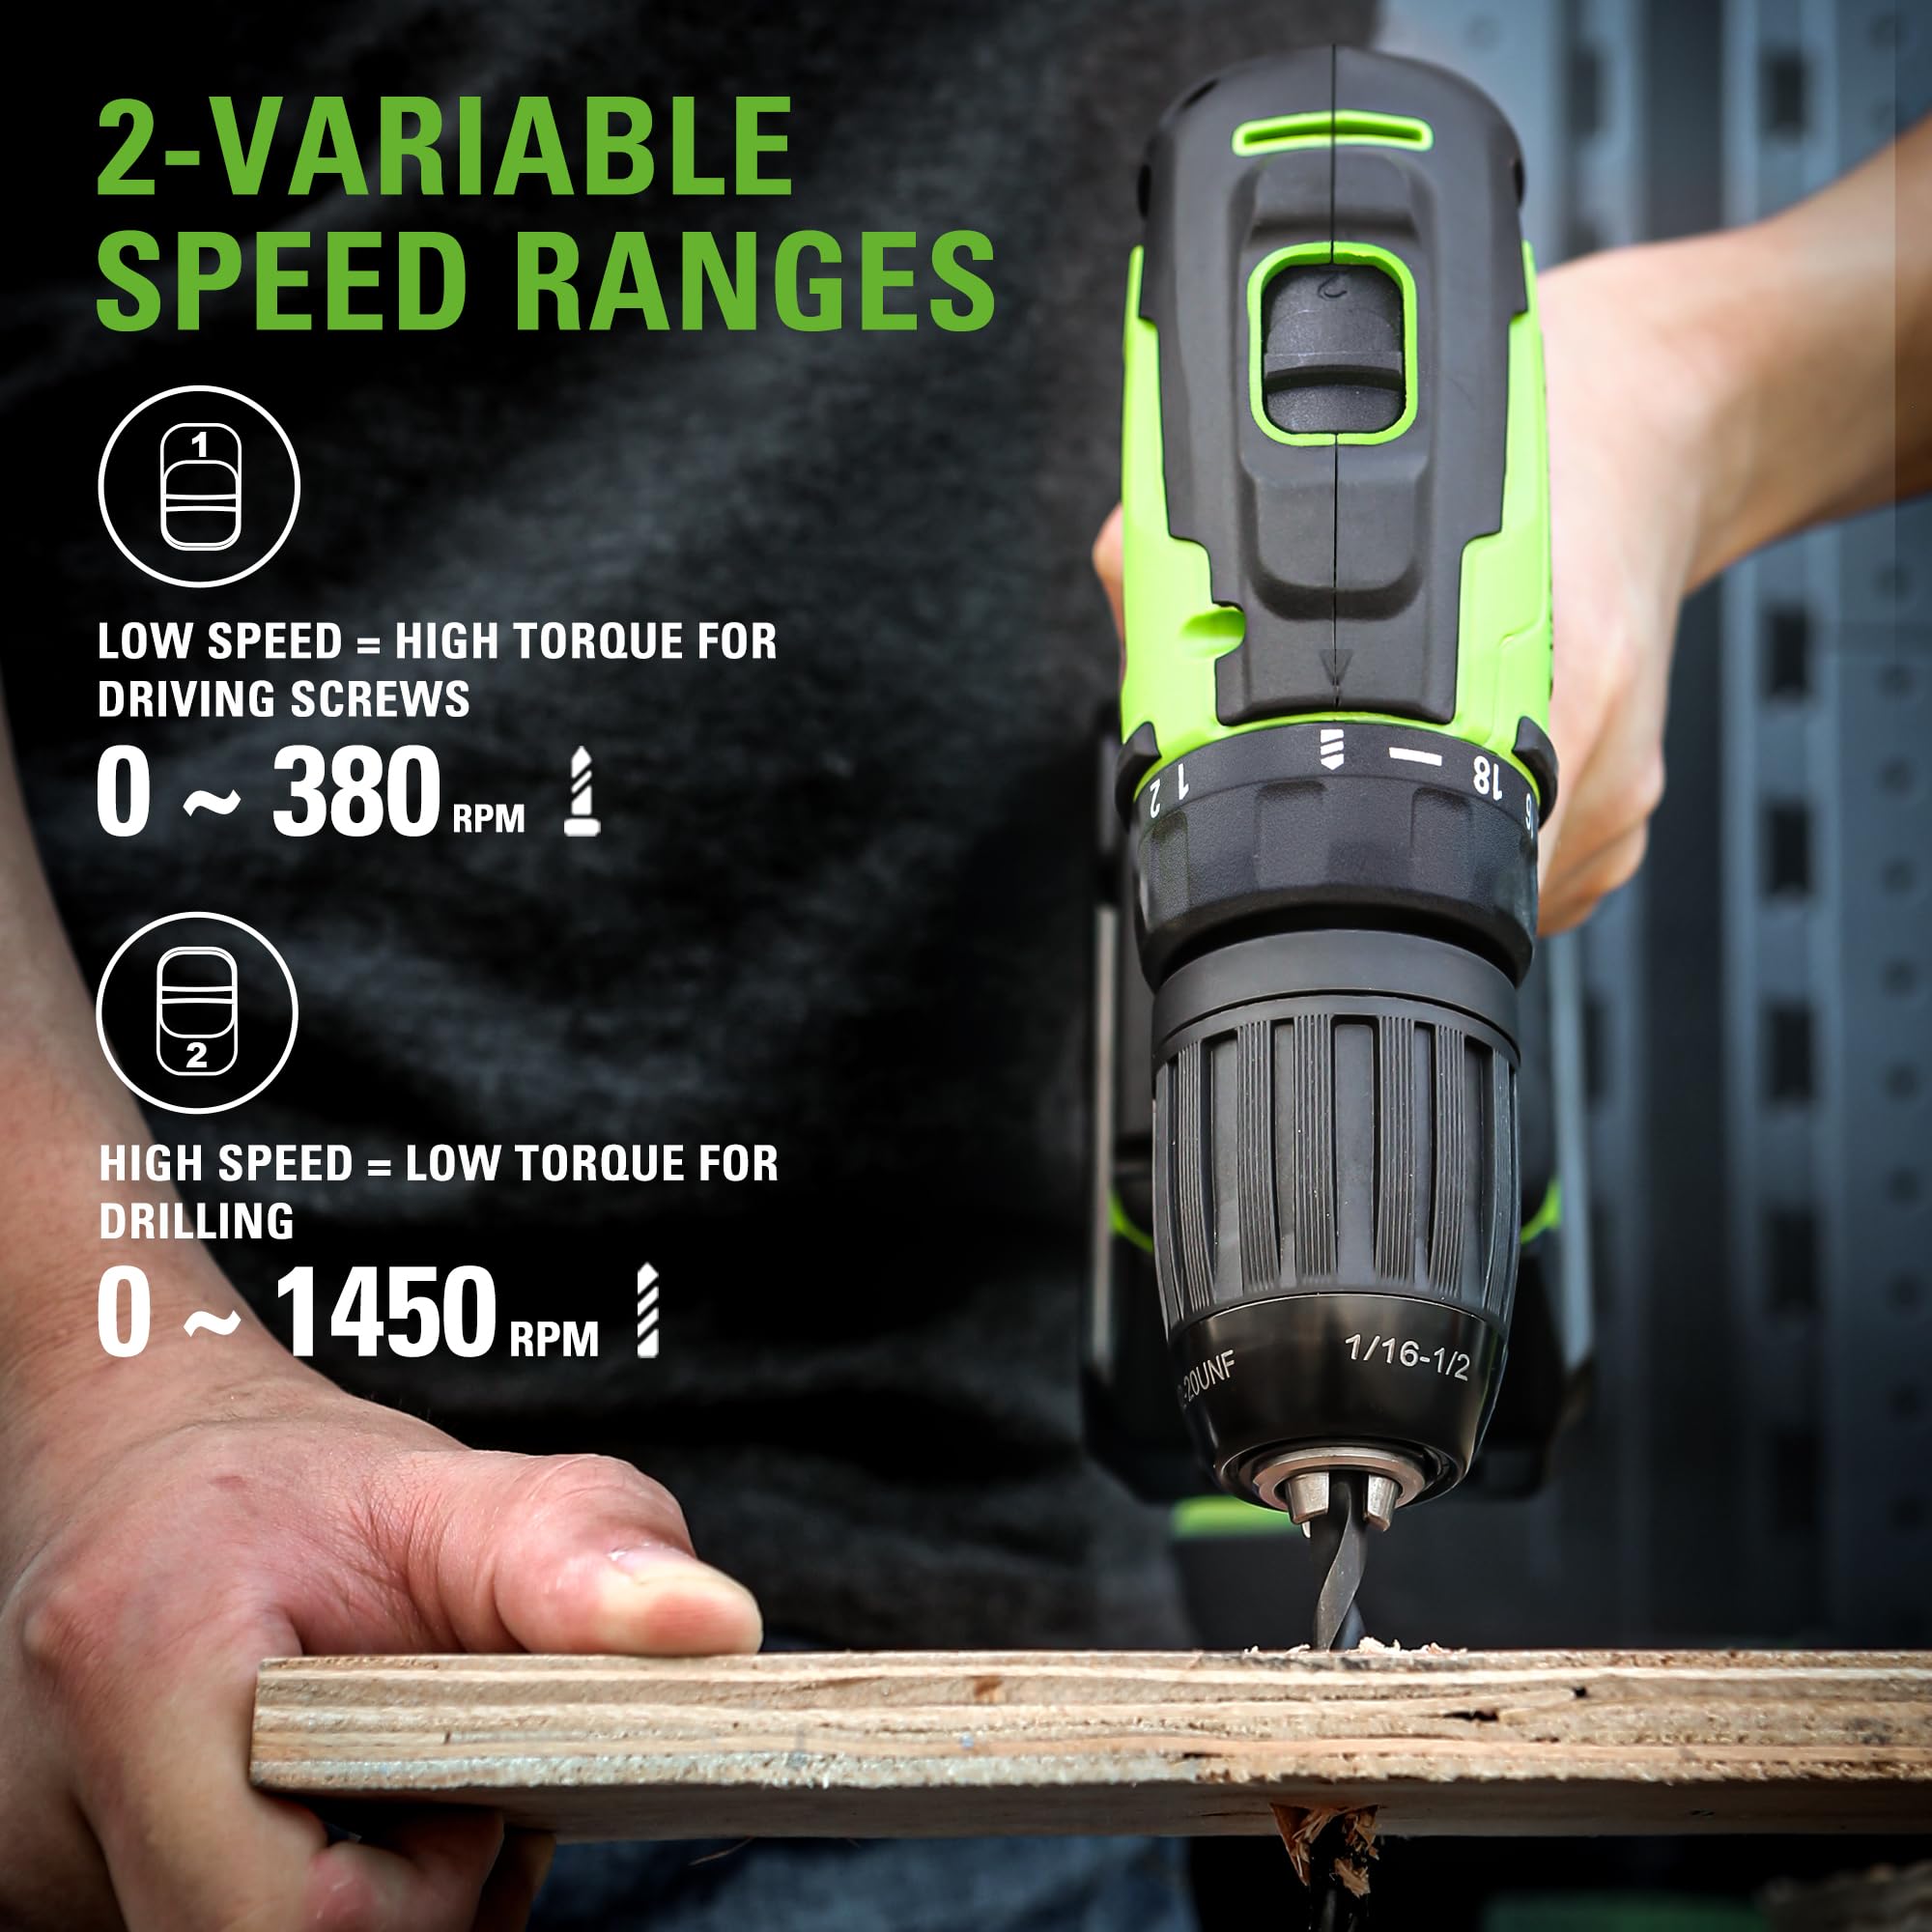 Greenworks 24V Brushless Drill / Driver, 2Ah USB Battery and Charger Included